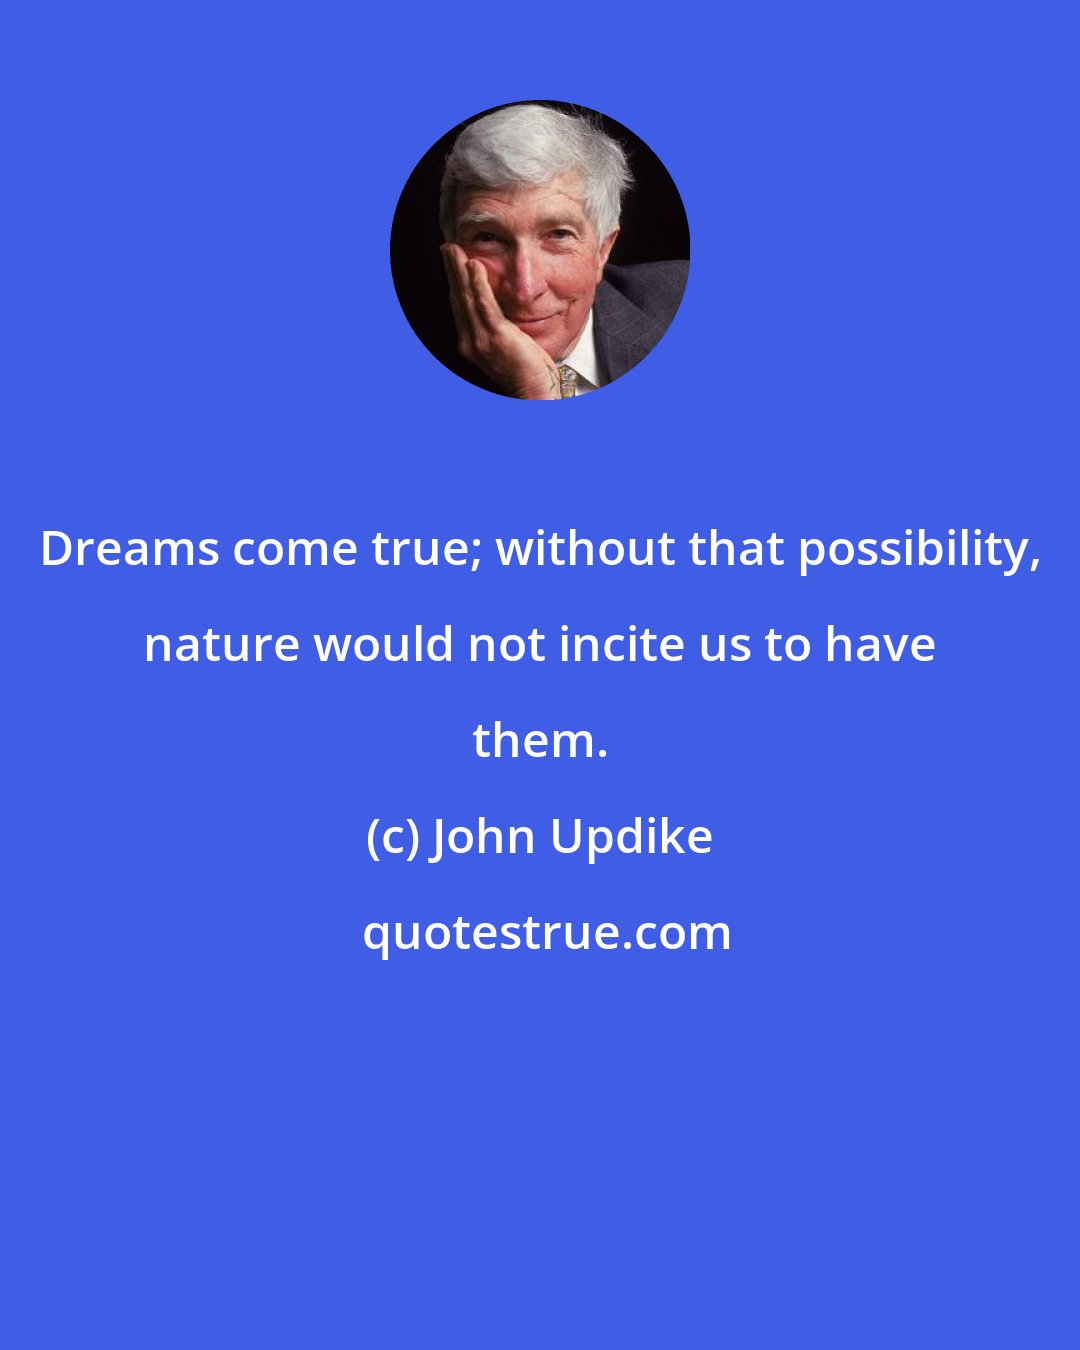 John Updike: Dreams come true; without that possibility, nature would not incite us to have them.